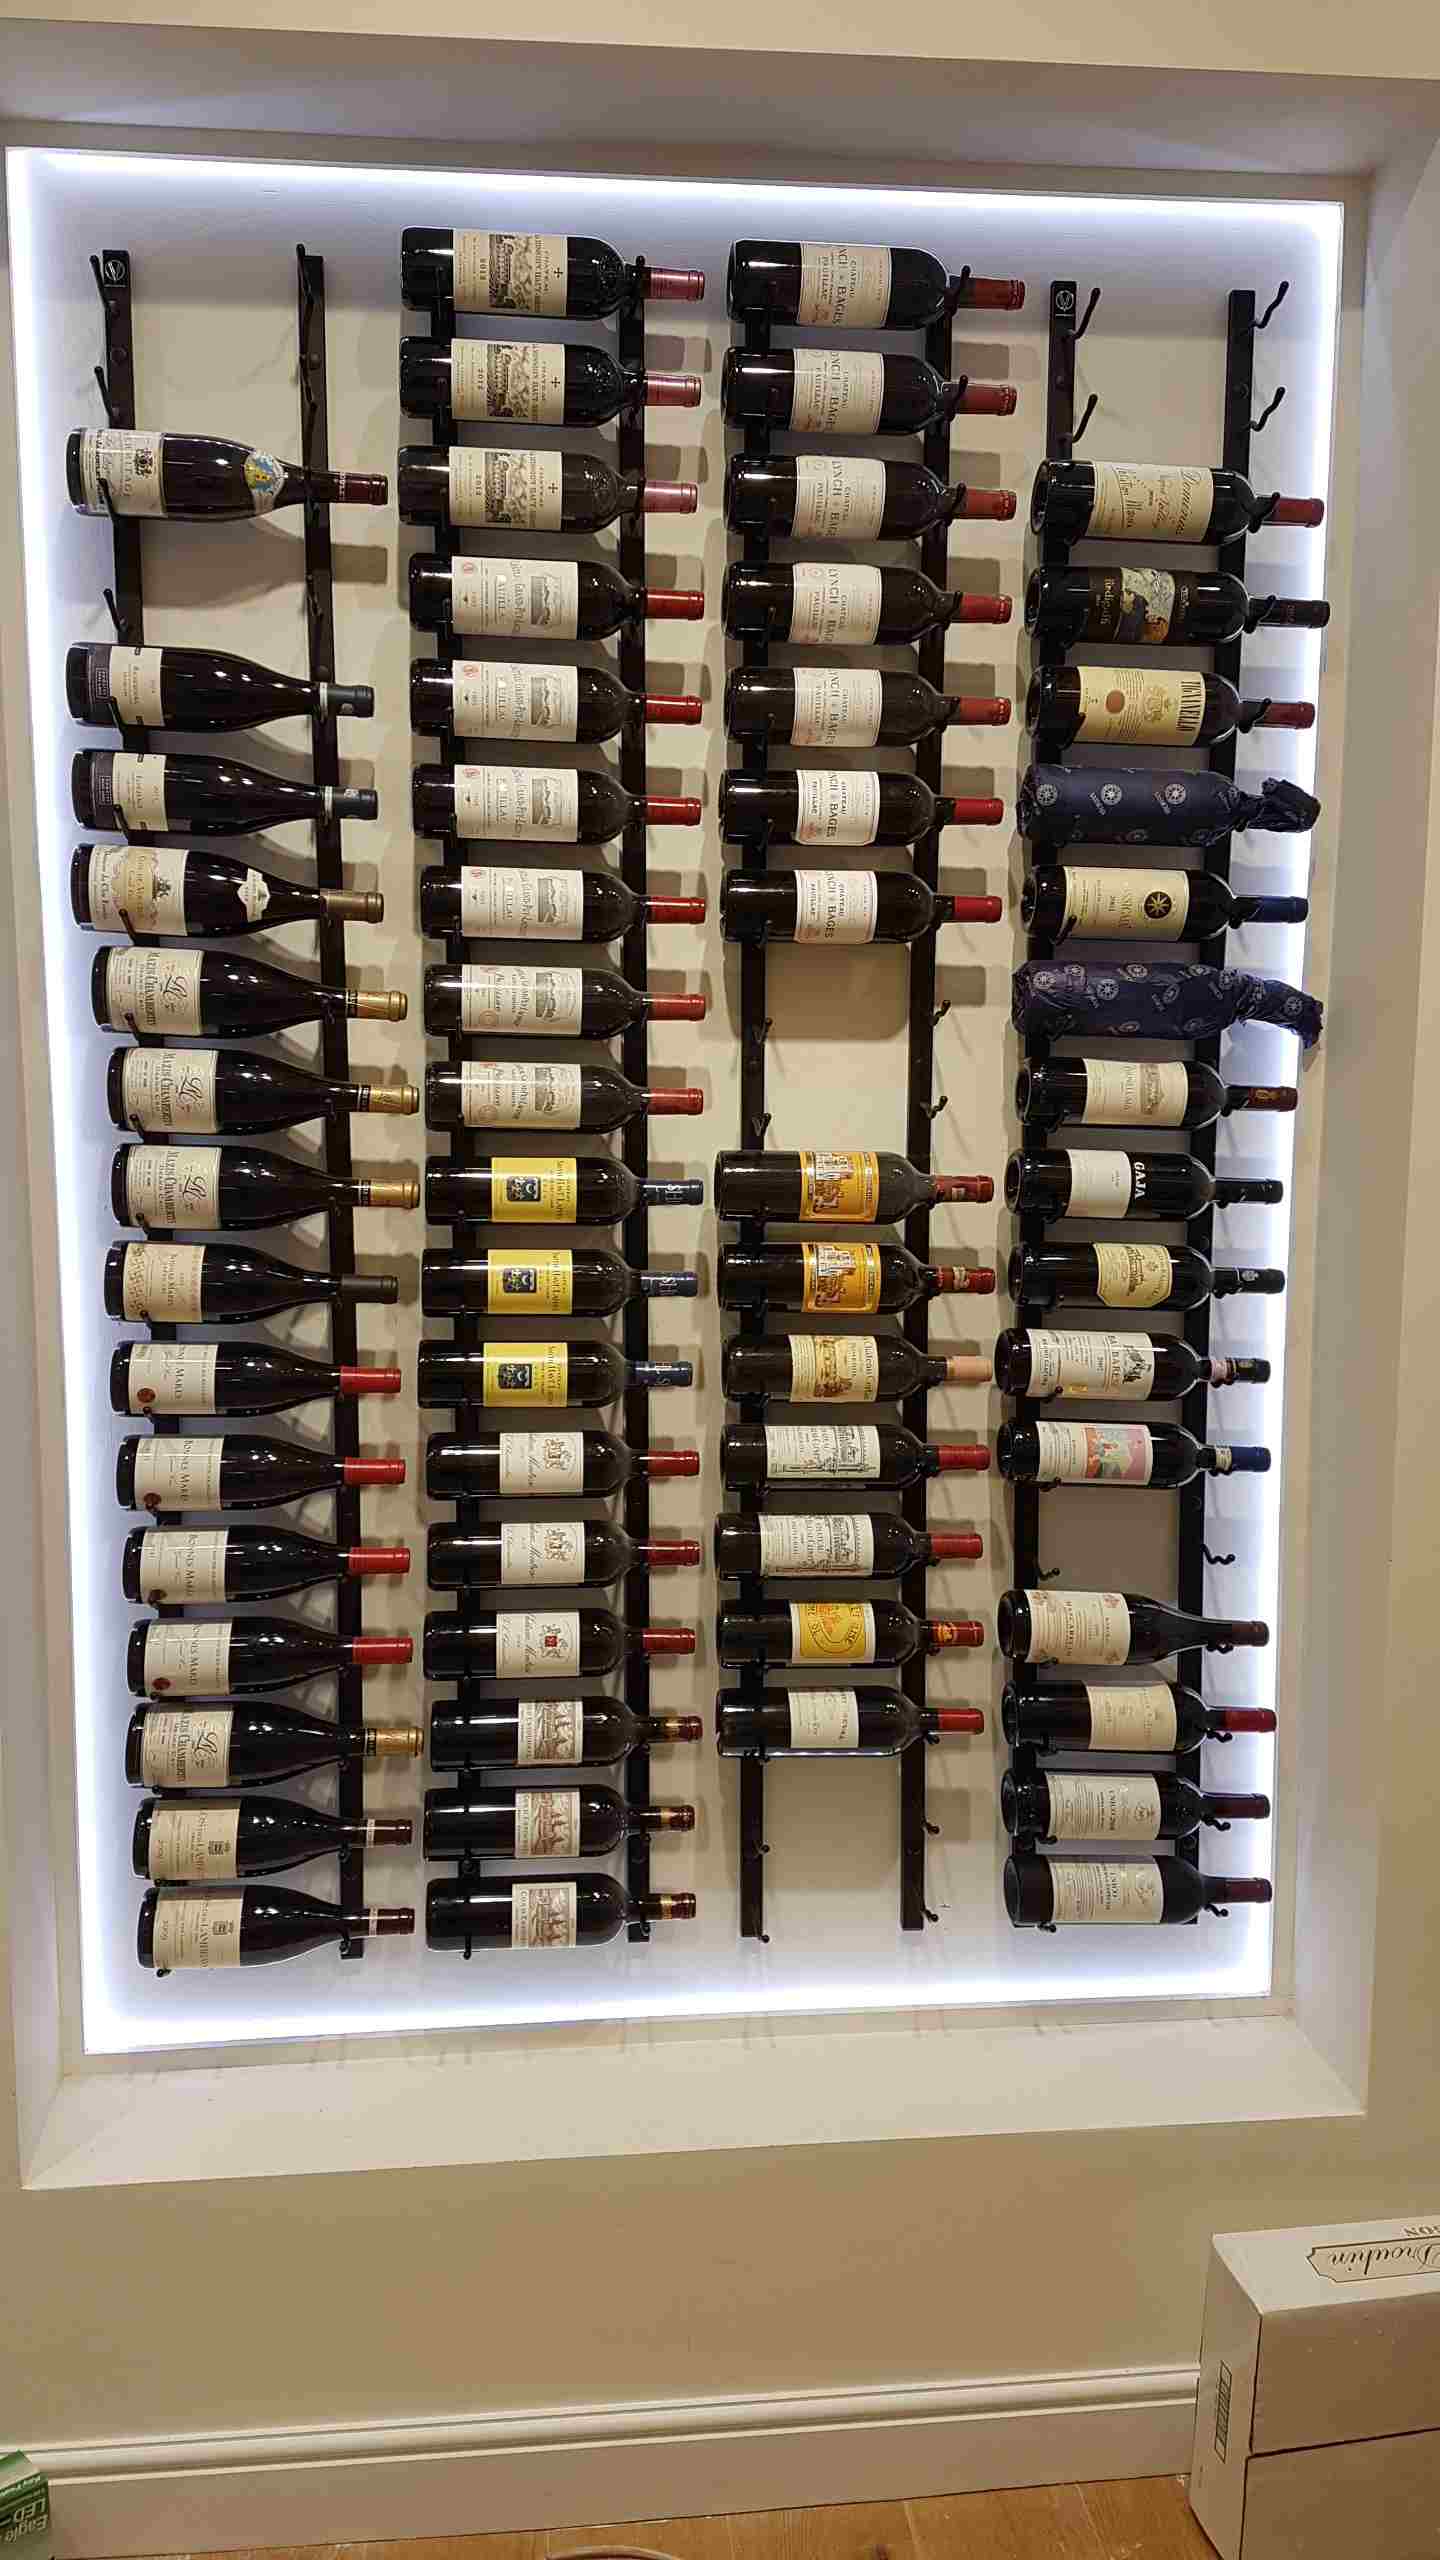 9 bottle wine rack wall mounted in alcove wine cellar space